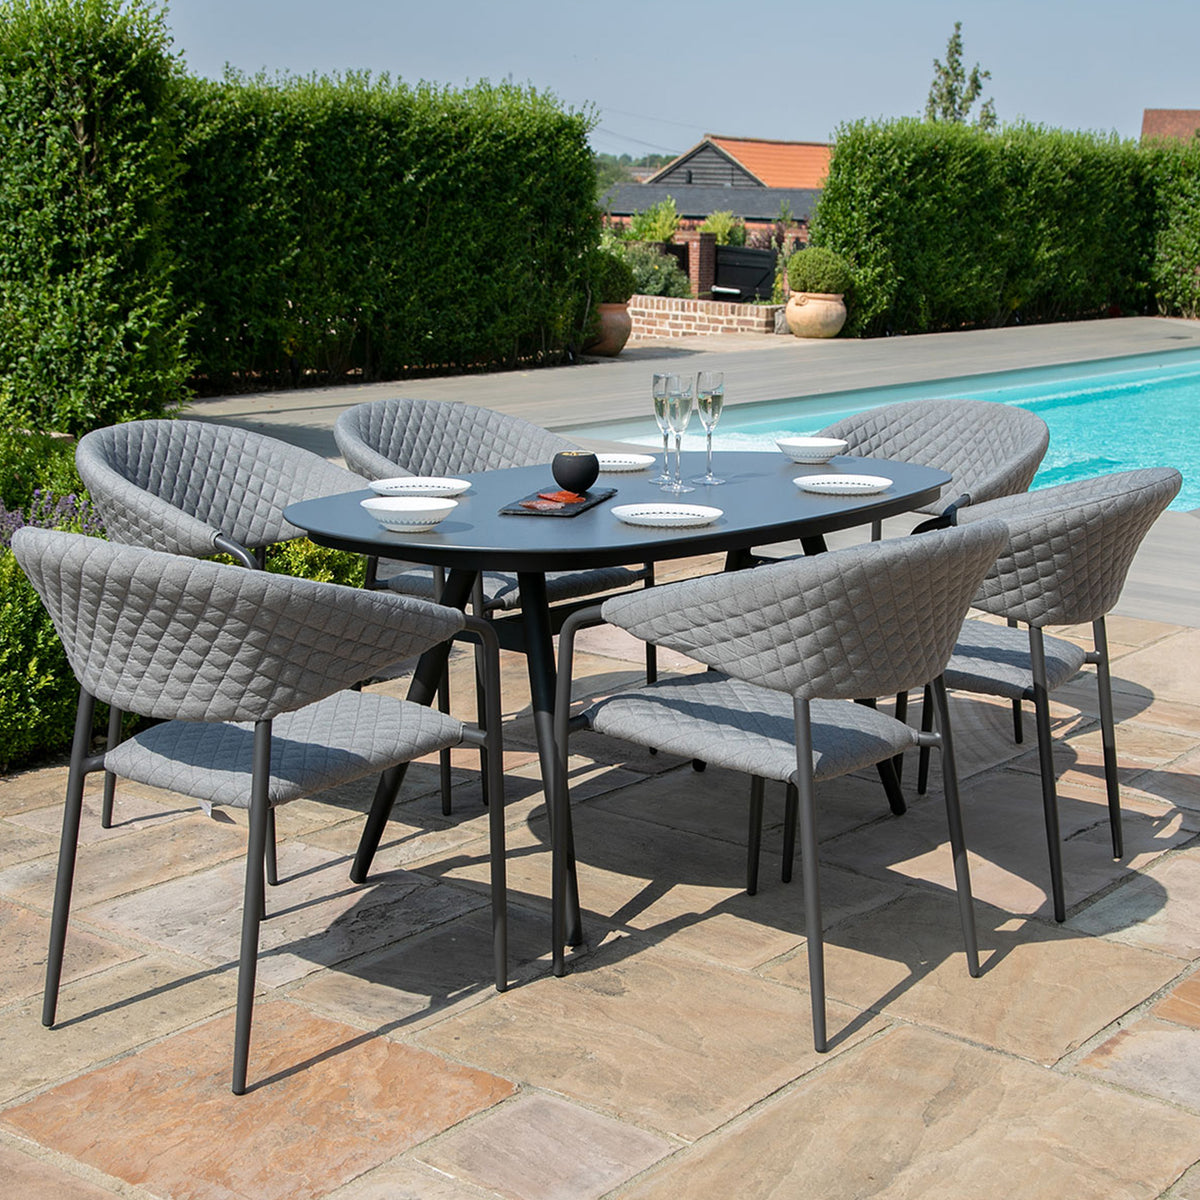 Maze Pebble Grey 6 Seat Outdoor Oval Dining Set from Roseland Furniture